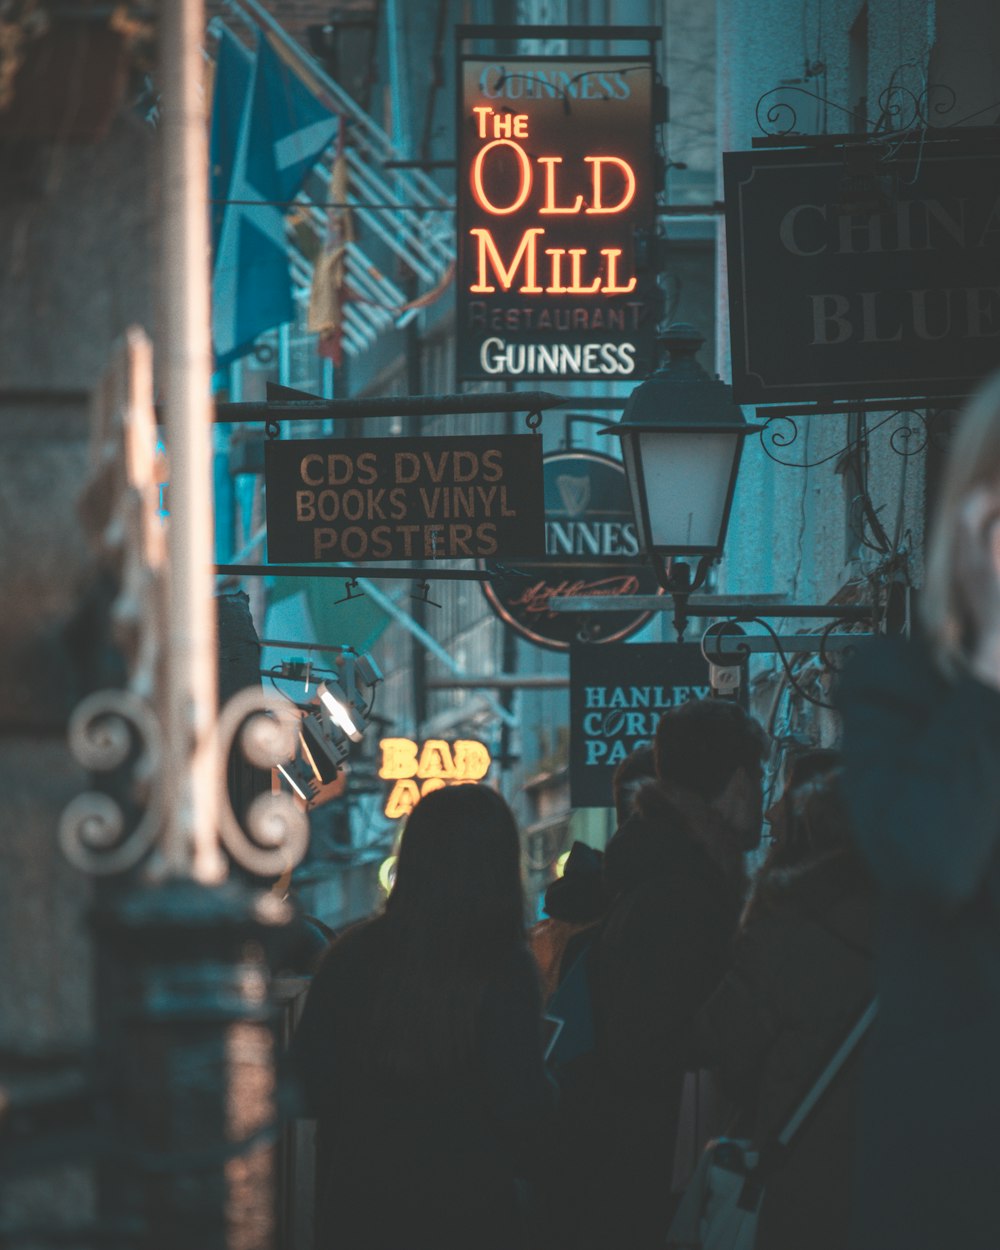 The Old Mill signage